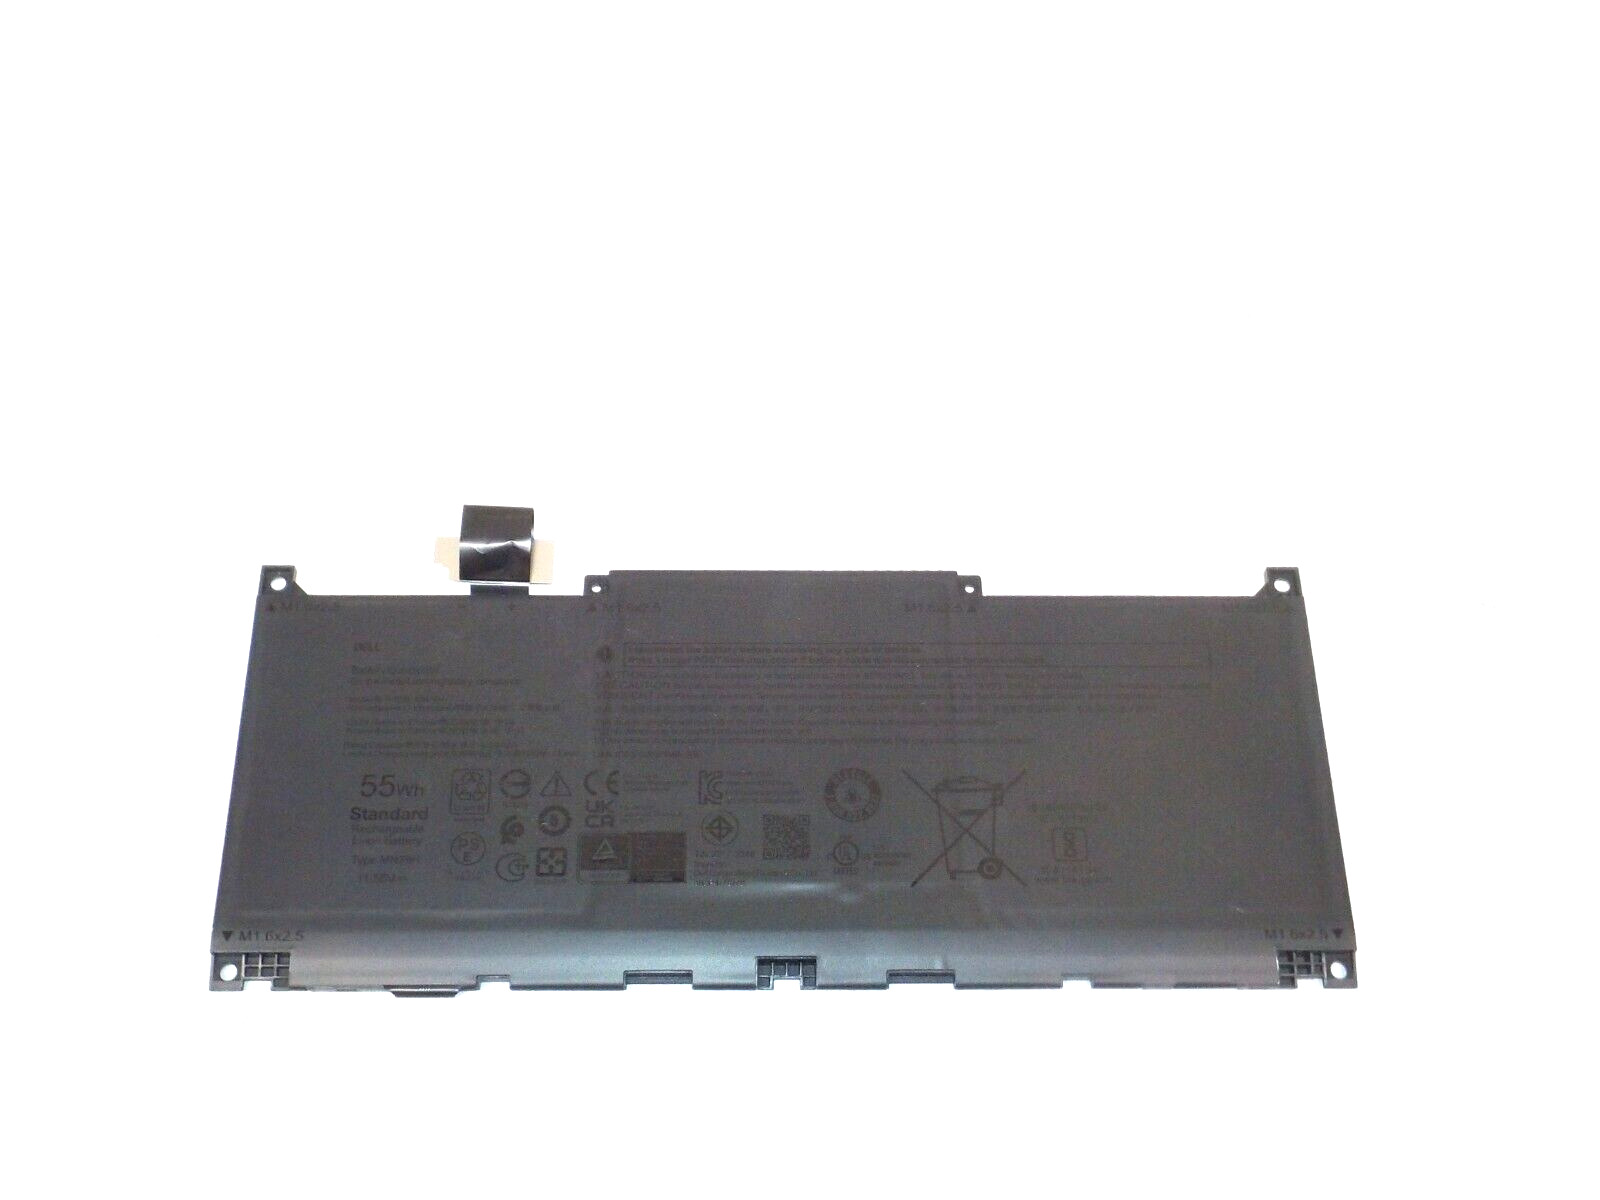 New Dell OEM Original XPS 13 Plus 9320 55Wh 3-cell Laptop Battery - MN79H